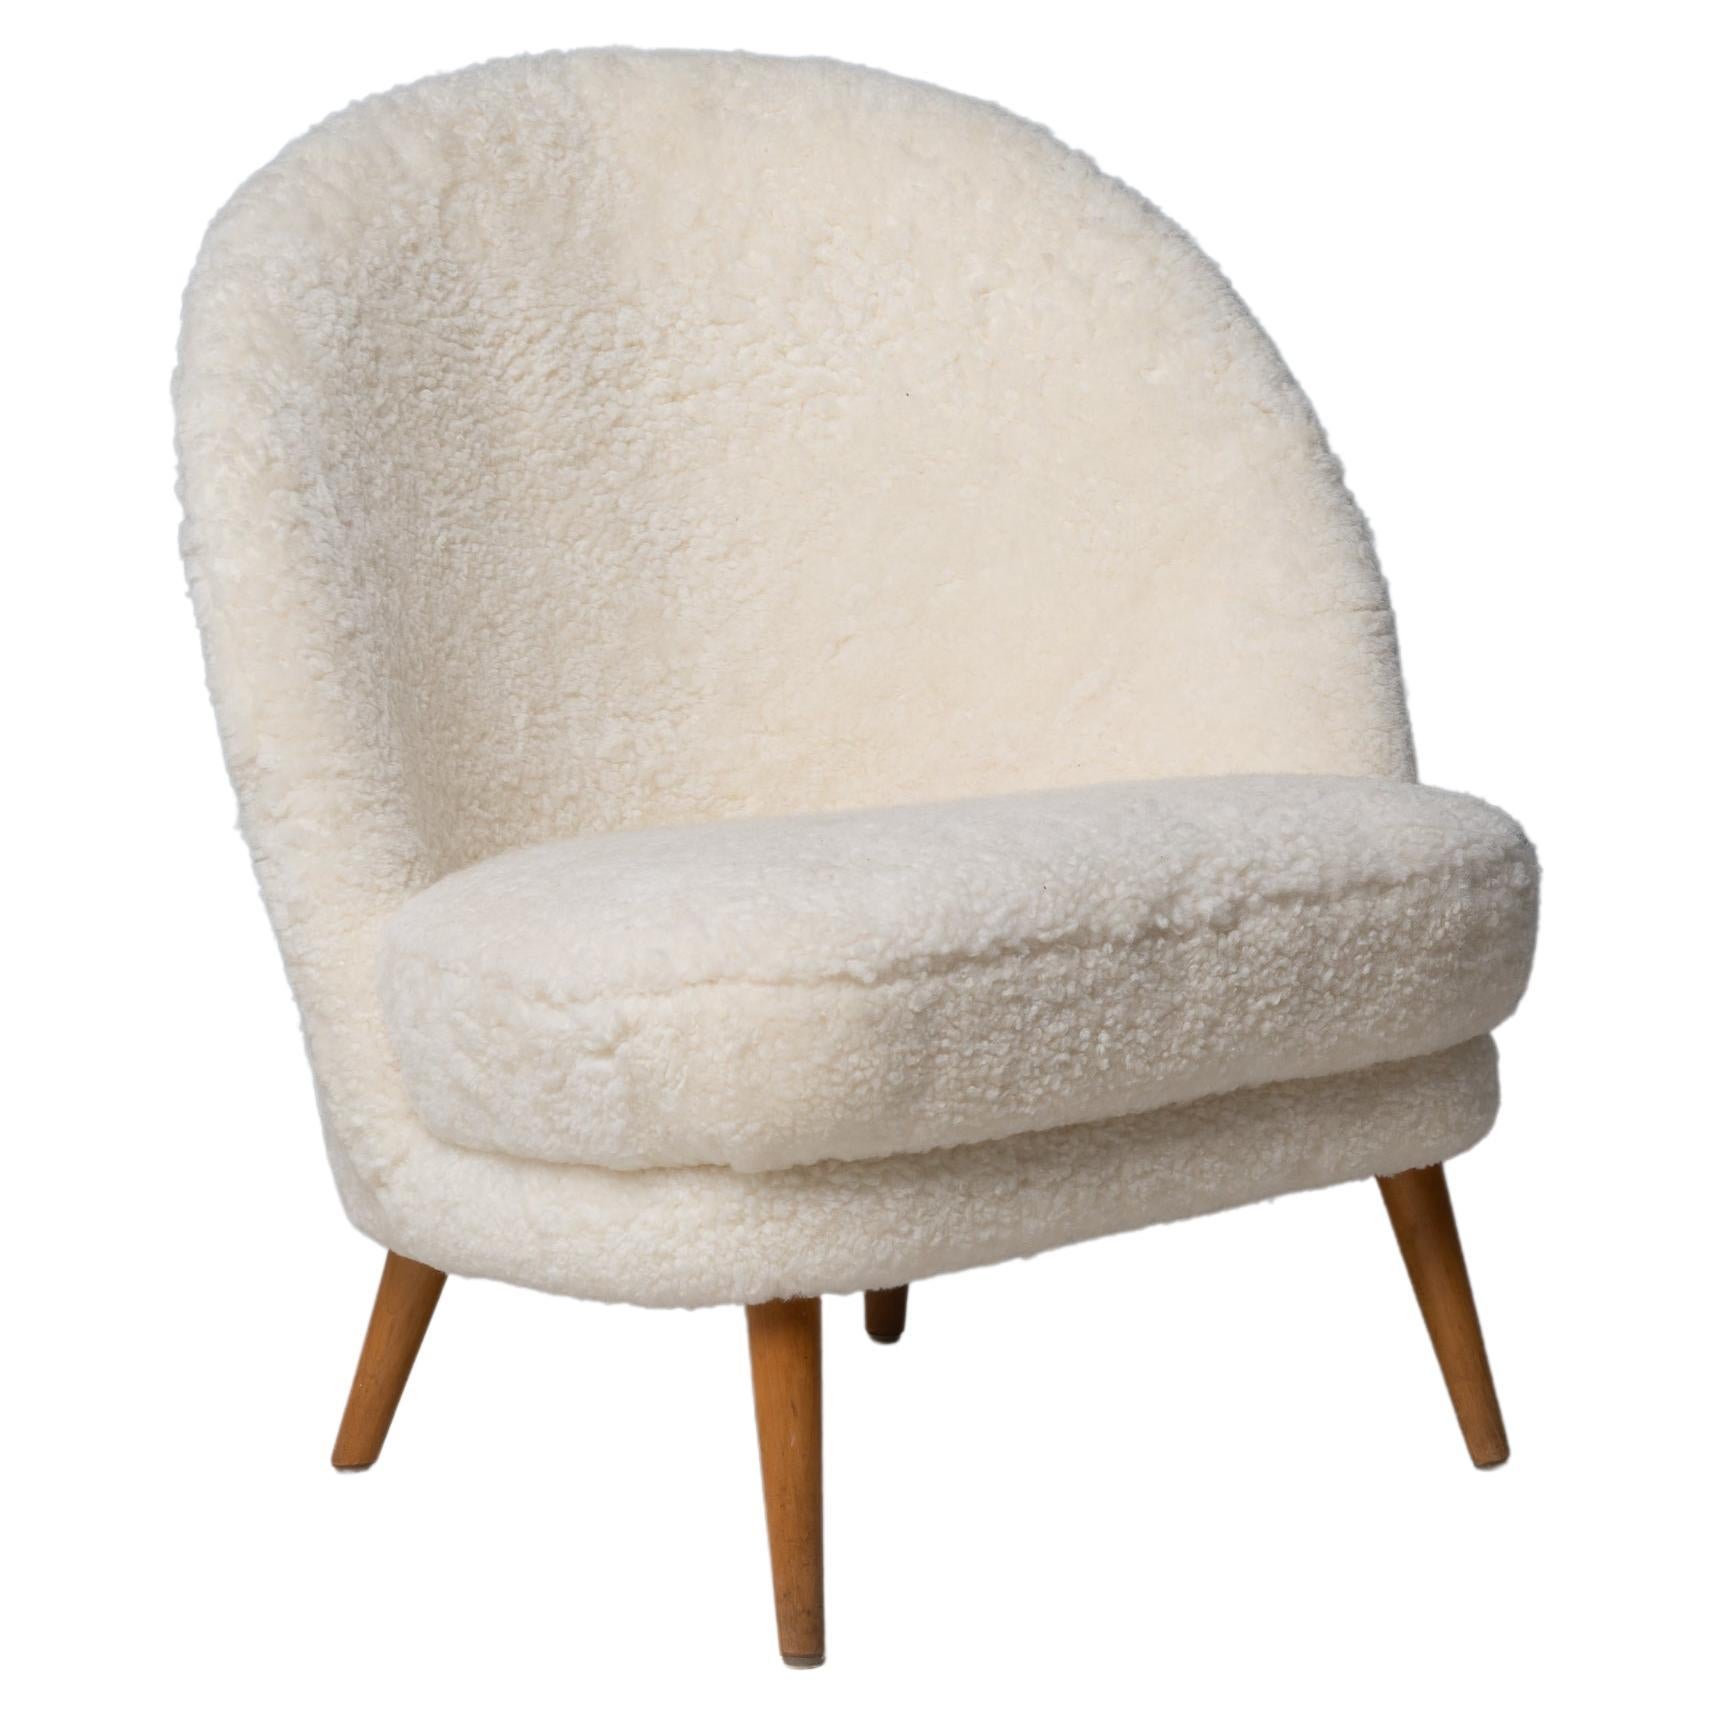 Scandinavian Modern Swedish White Sheepskin Easy Chair Attributed to Arne Norell For Sale